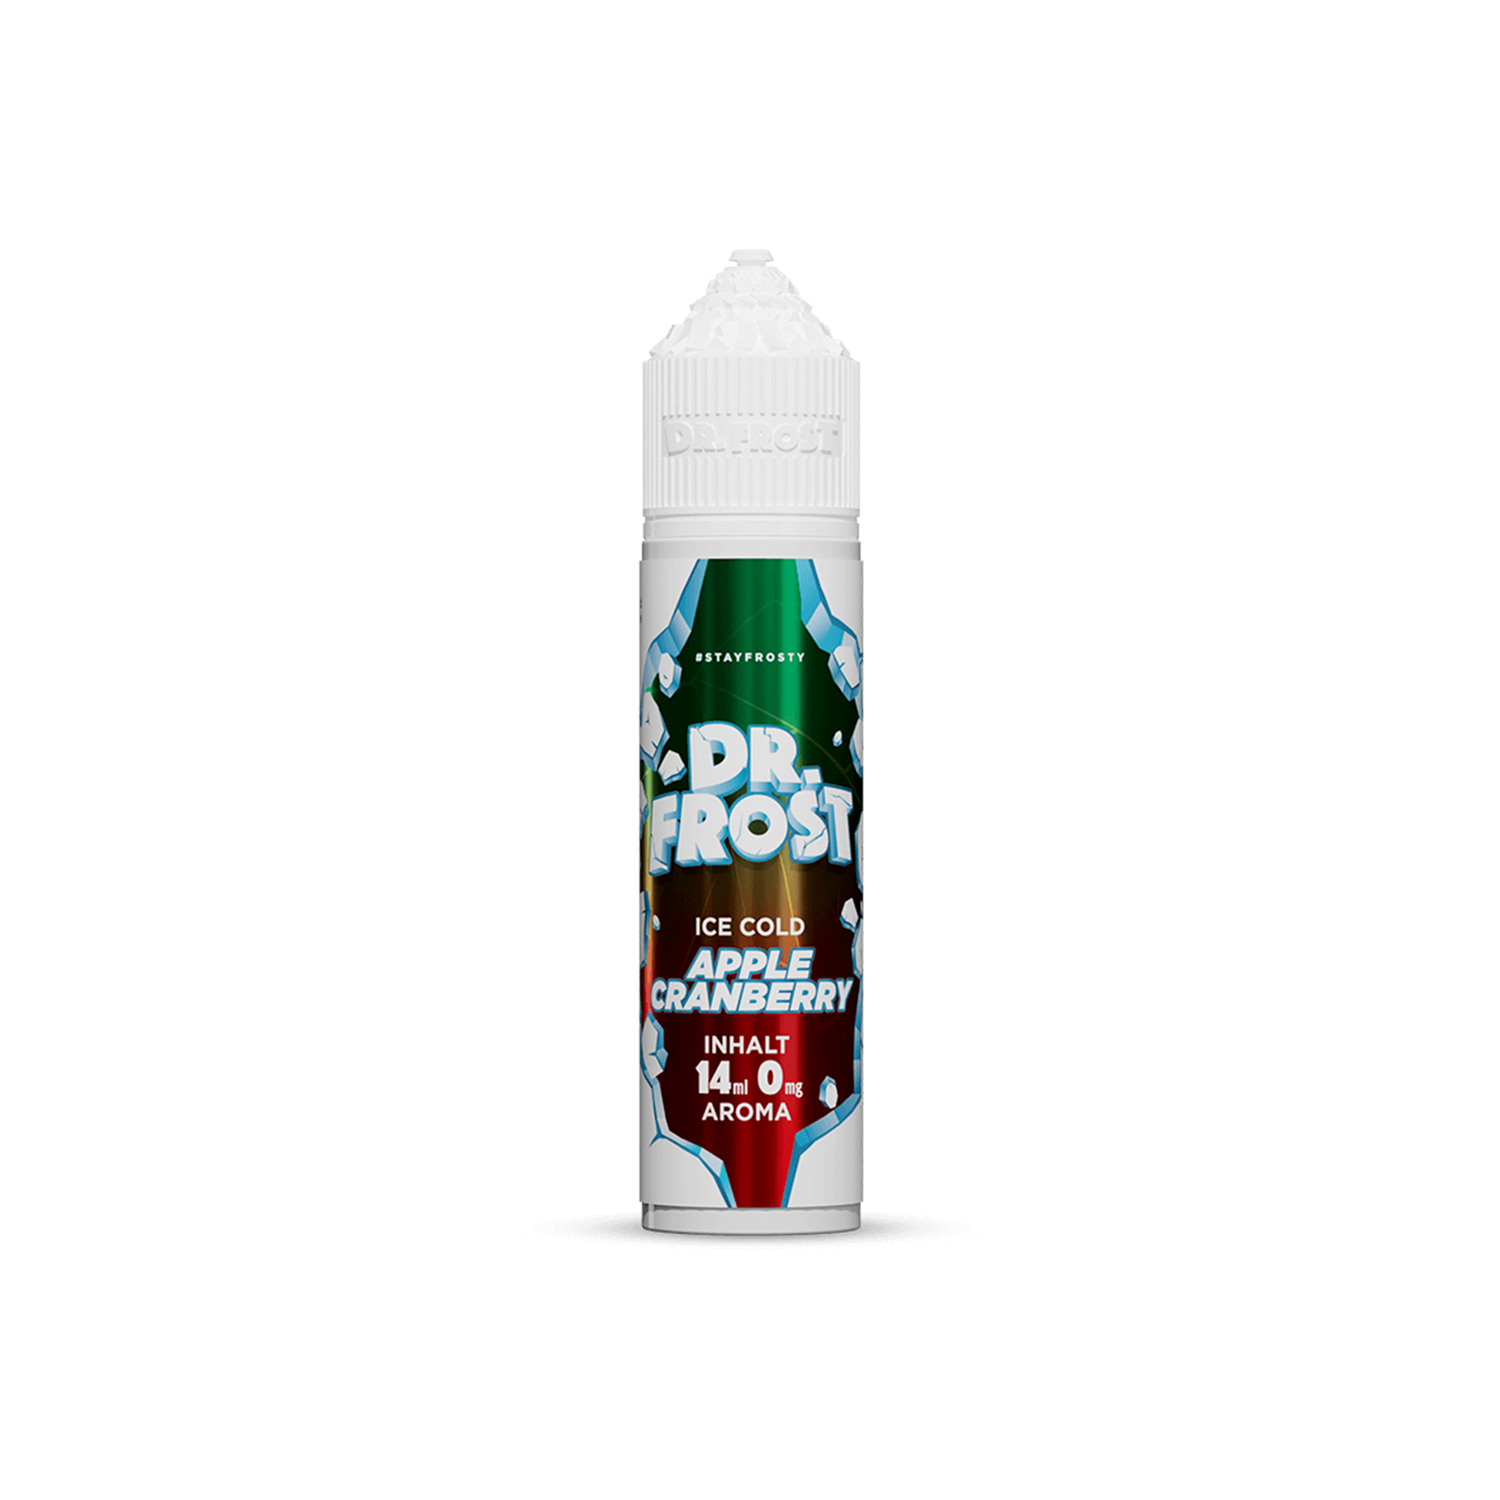 Dr. Frost - Ice Cold - Apple Cranberry 14 ml Aroma